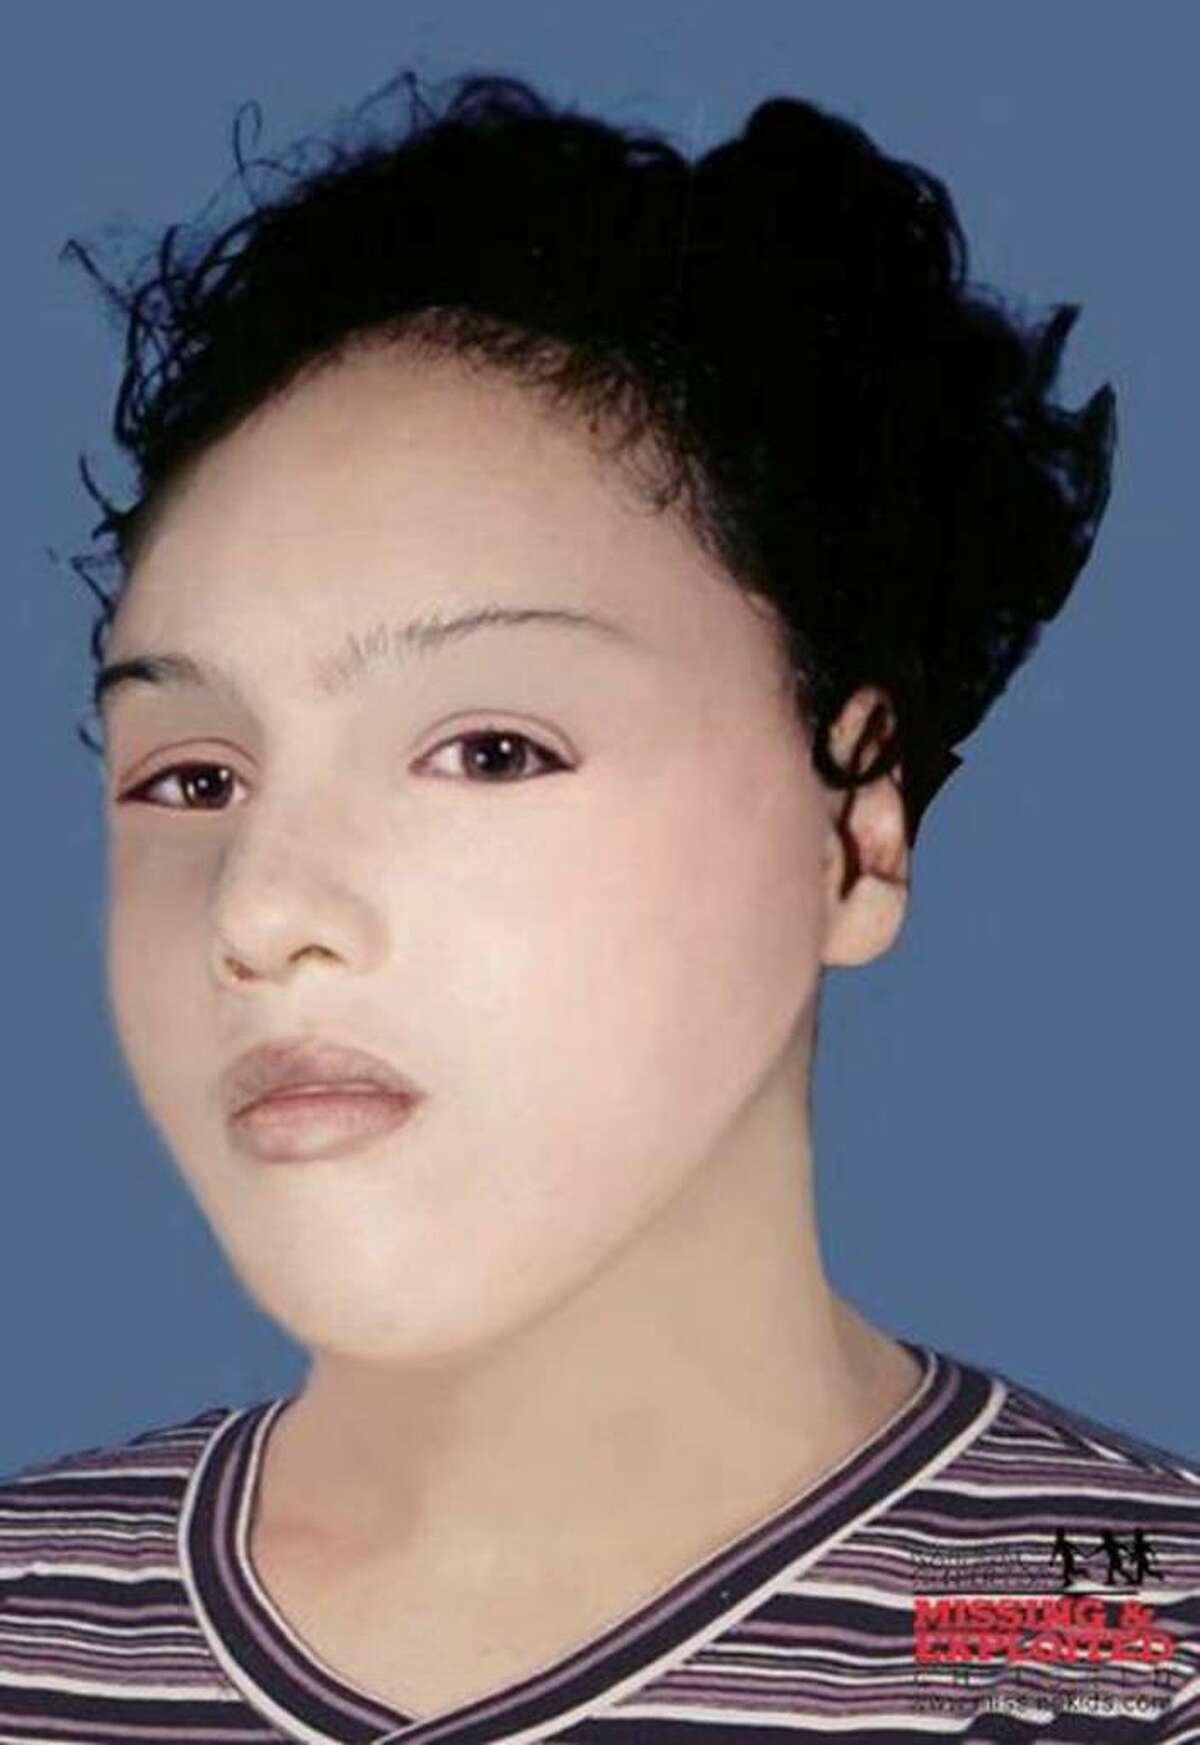 Composite sketch of an unknown woman found dead in New Britain Connecticut in September 1995. (Courtesy: New Britain, Conn., Police Department)